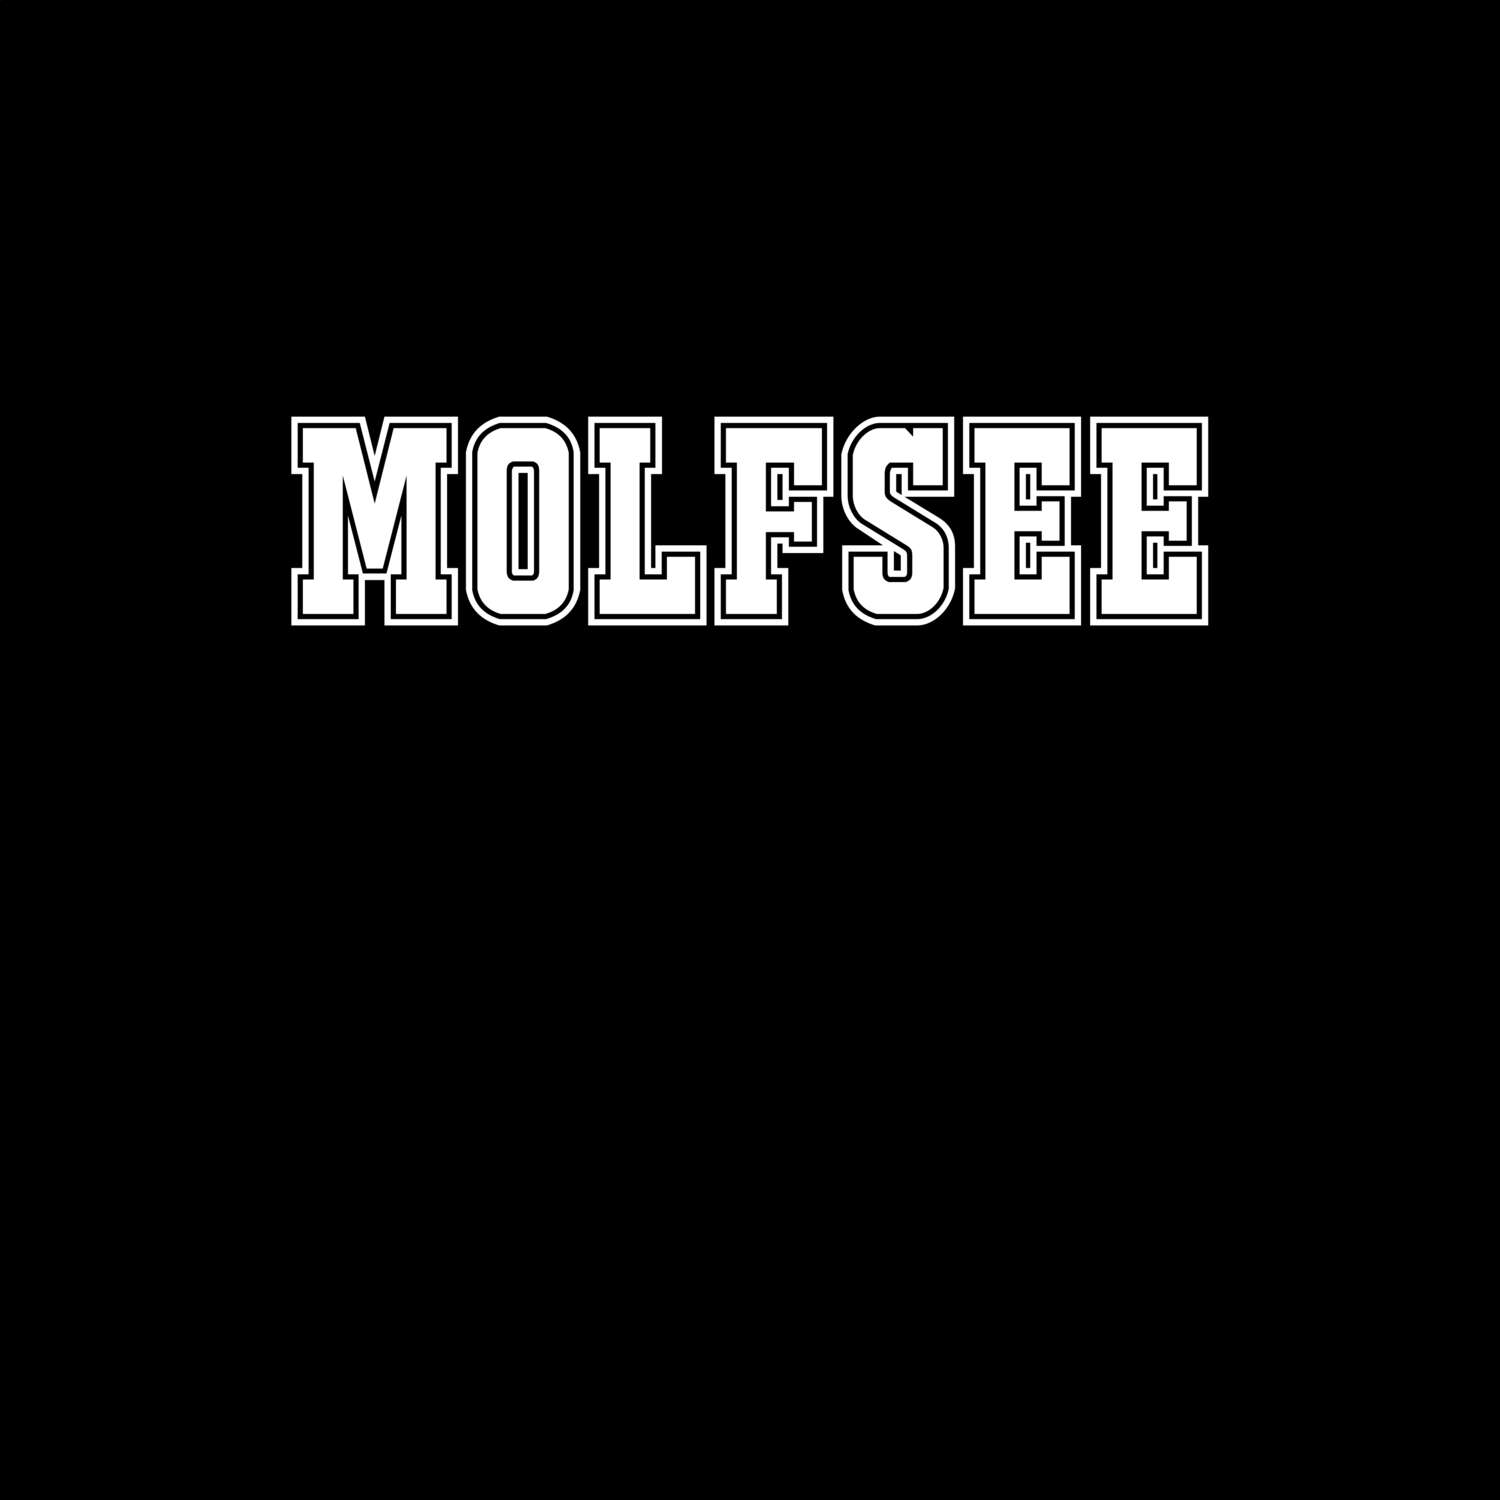 Molfsee T-Shirt »Classic«